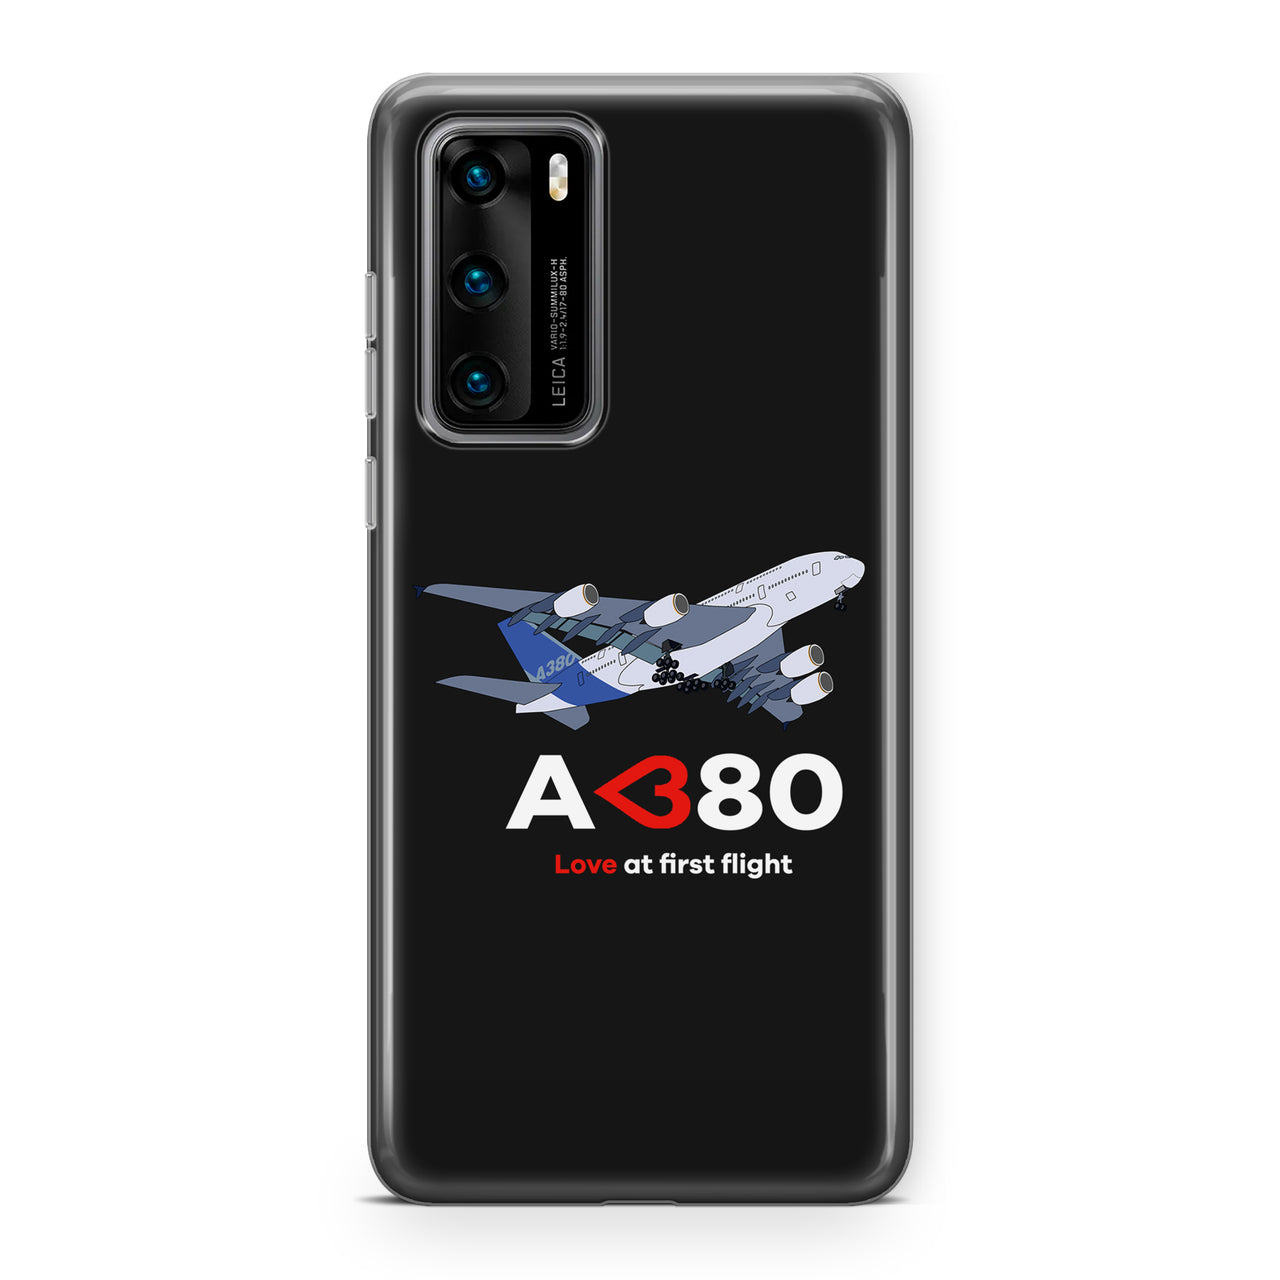 Airbus A380 Love at first flight Designed Huawei Cases